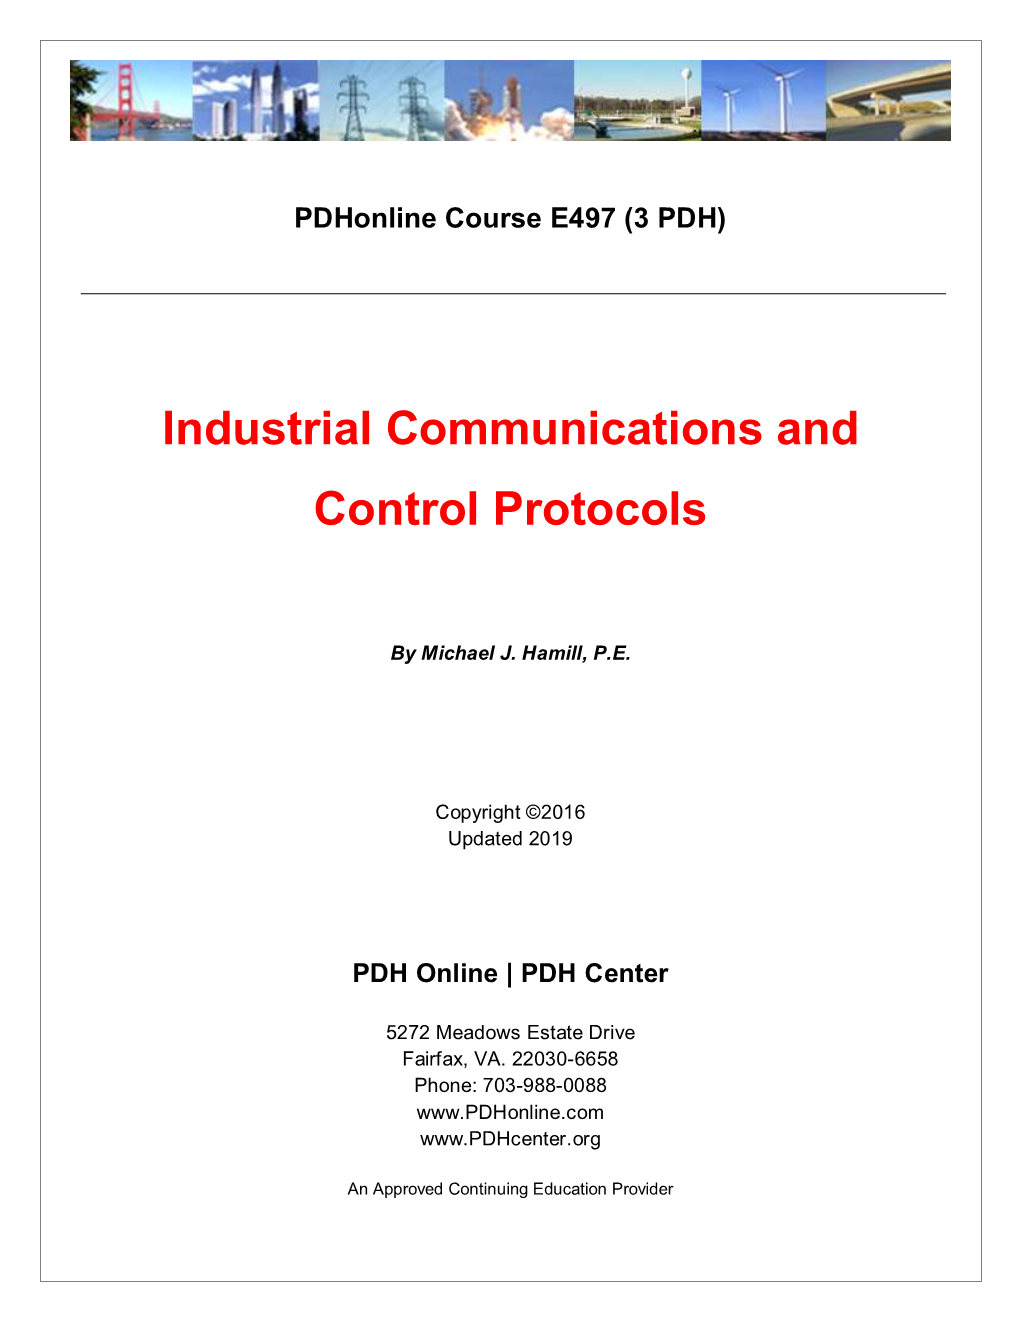 Industrial Communications and Control Protocols